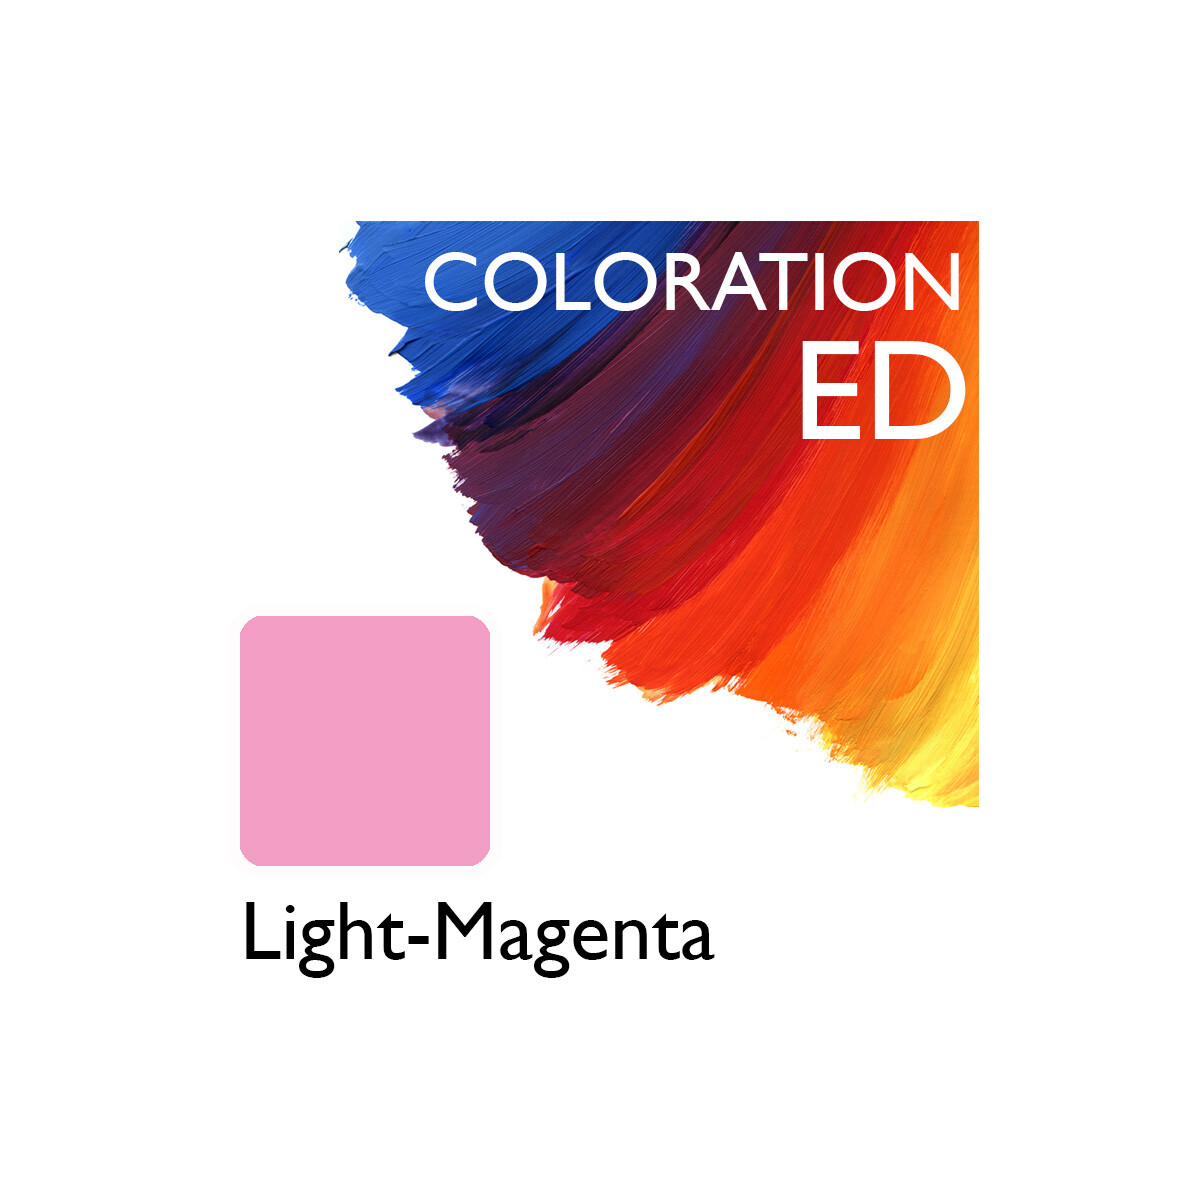 Coloration ED Flasche Light-Magenta